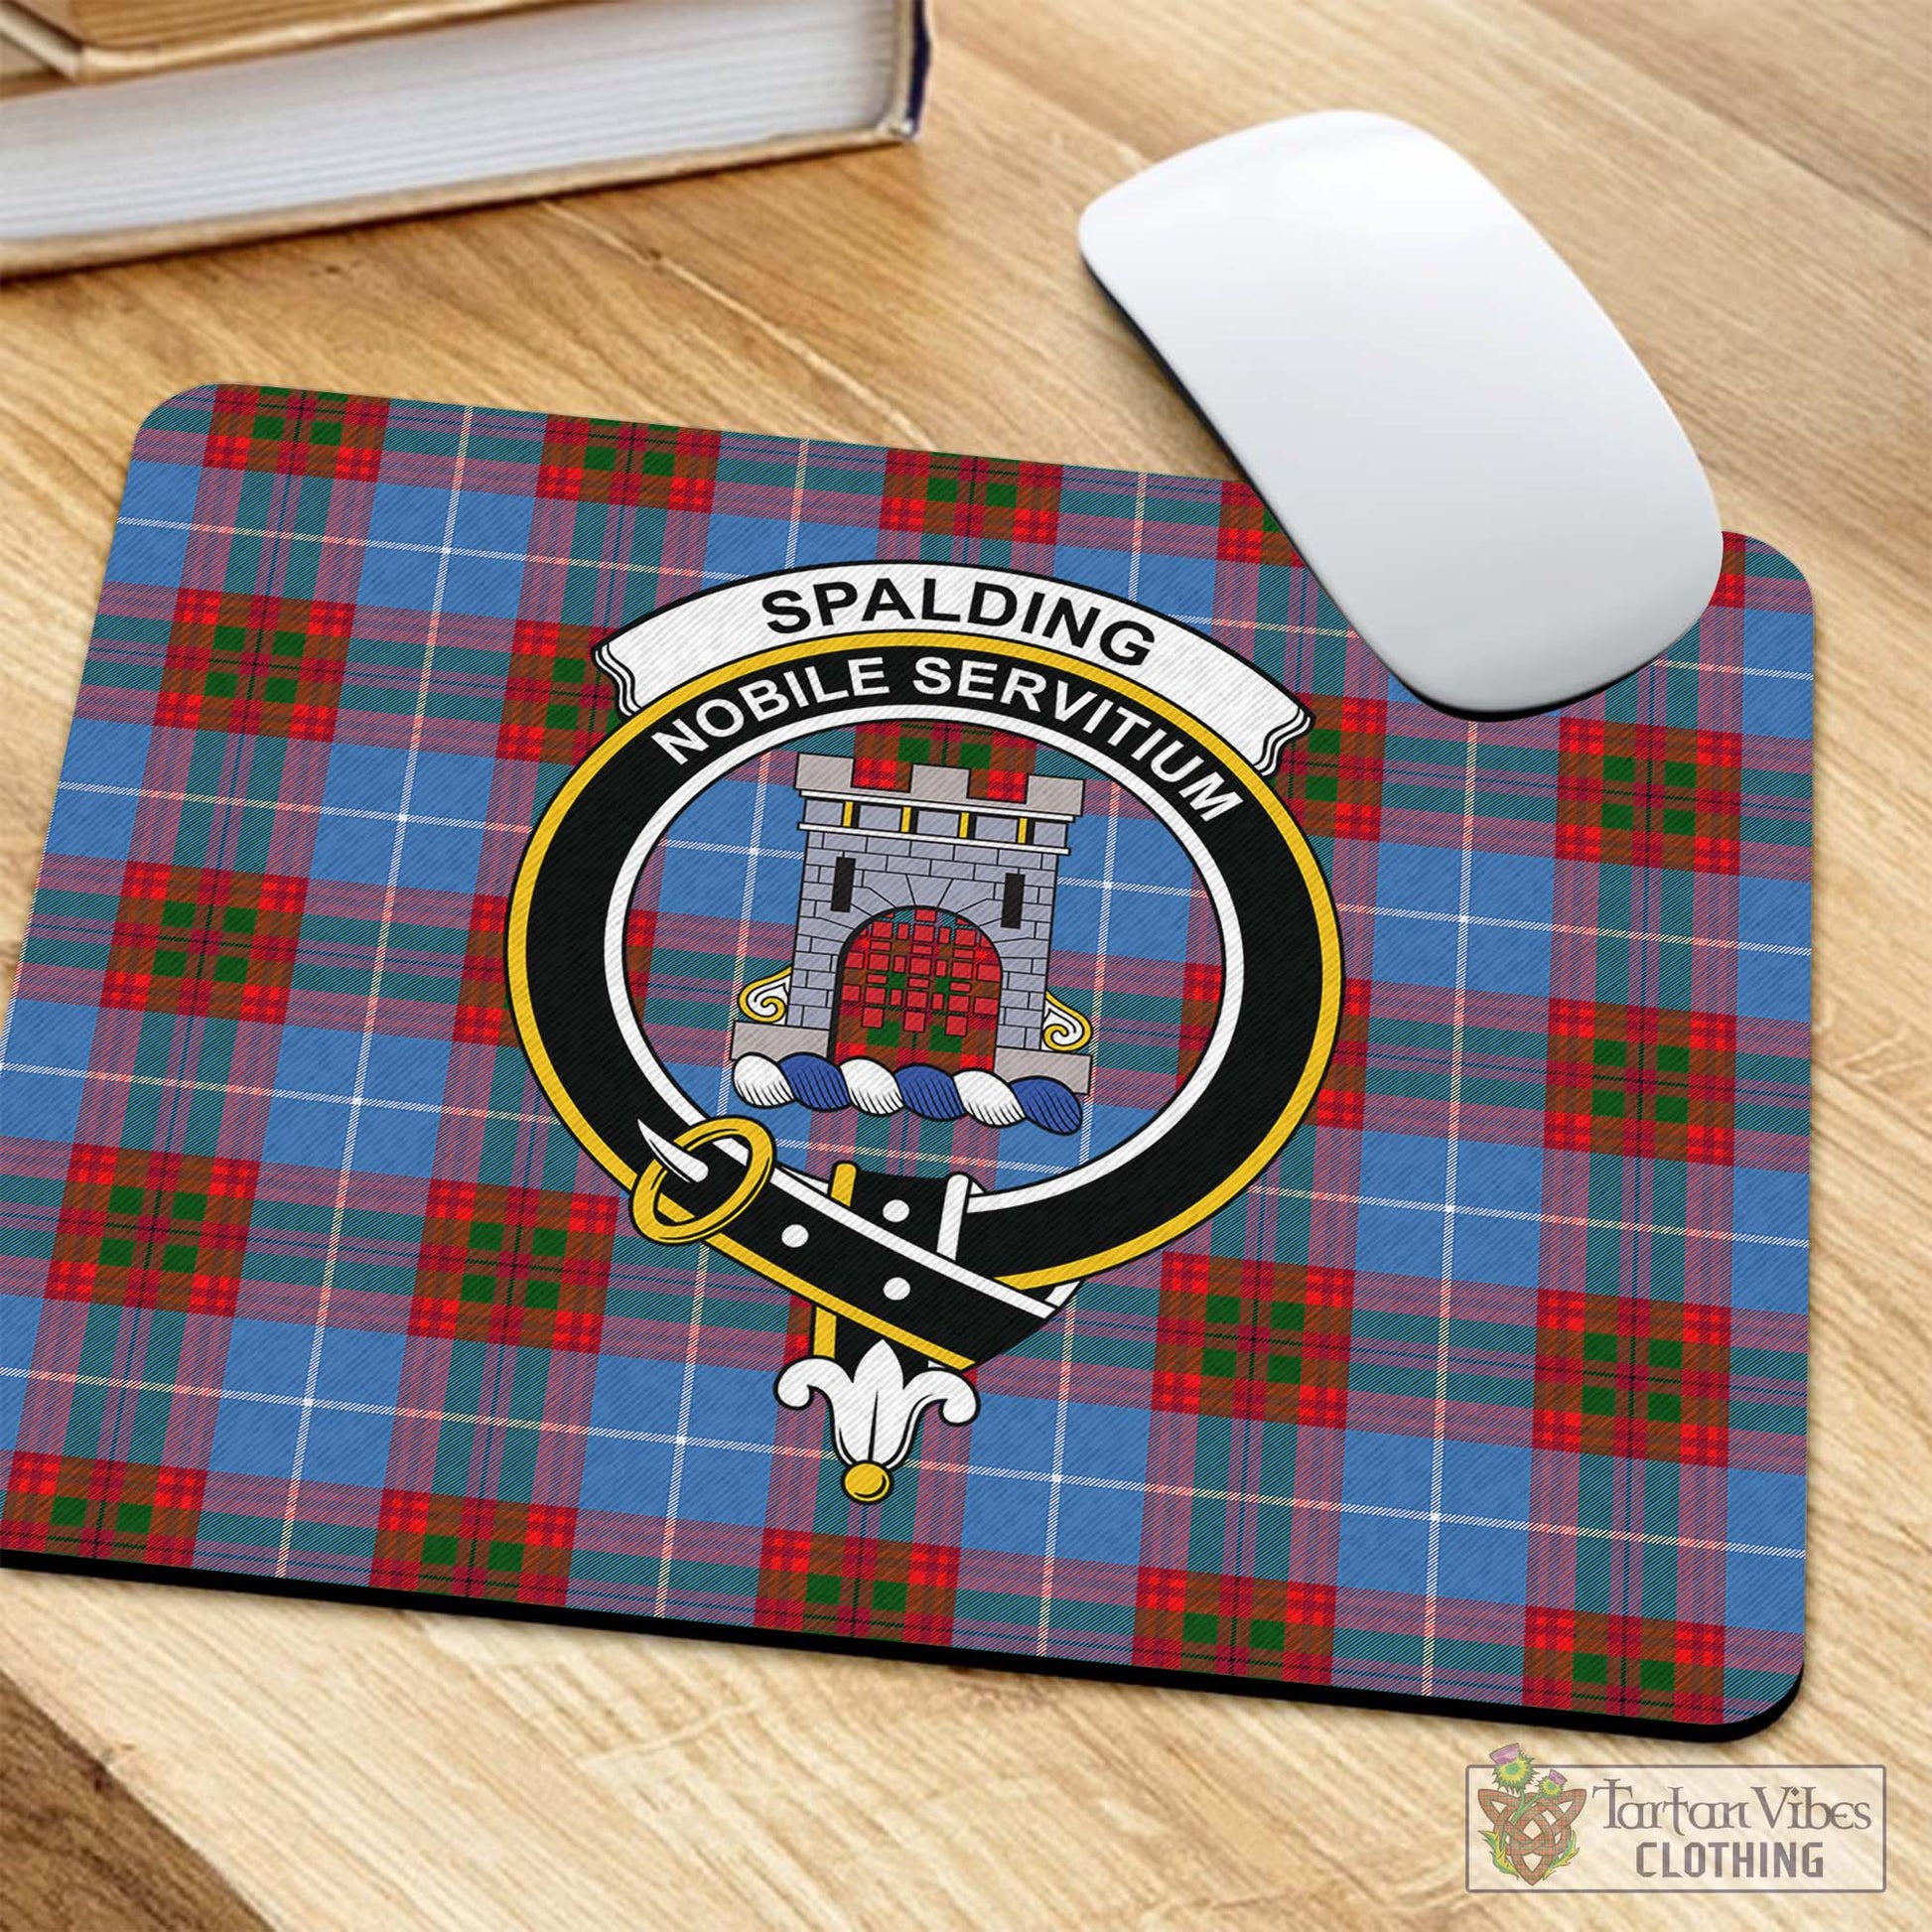 Tartan Vibes Clothing Spalding Tartan Mouse Pad with Family Crest